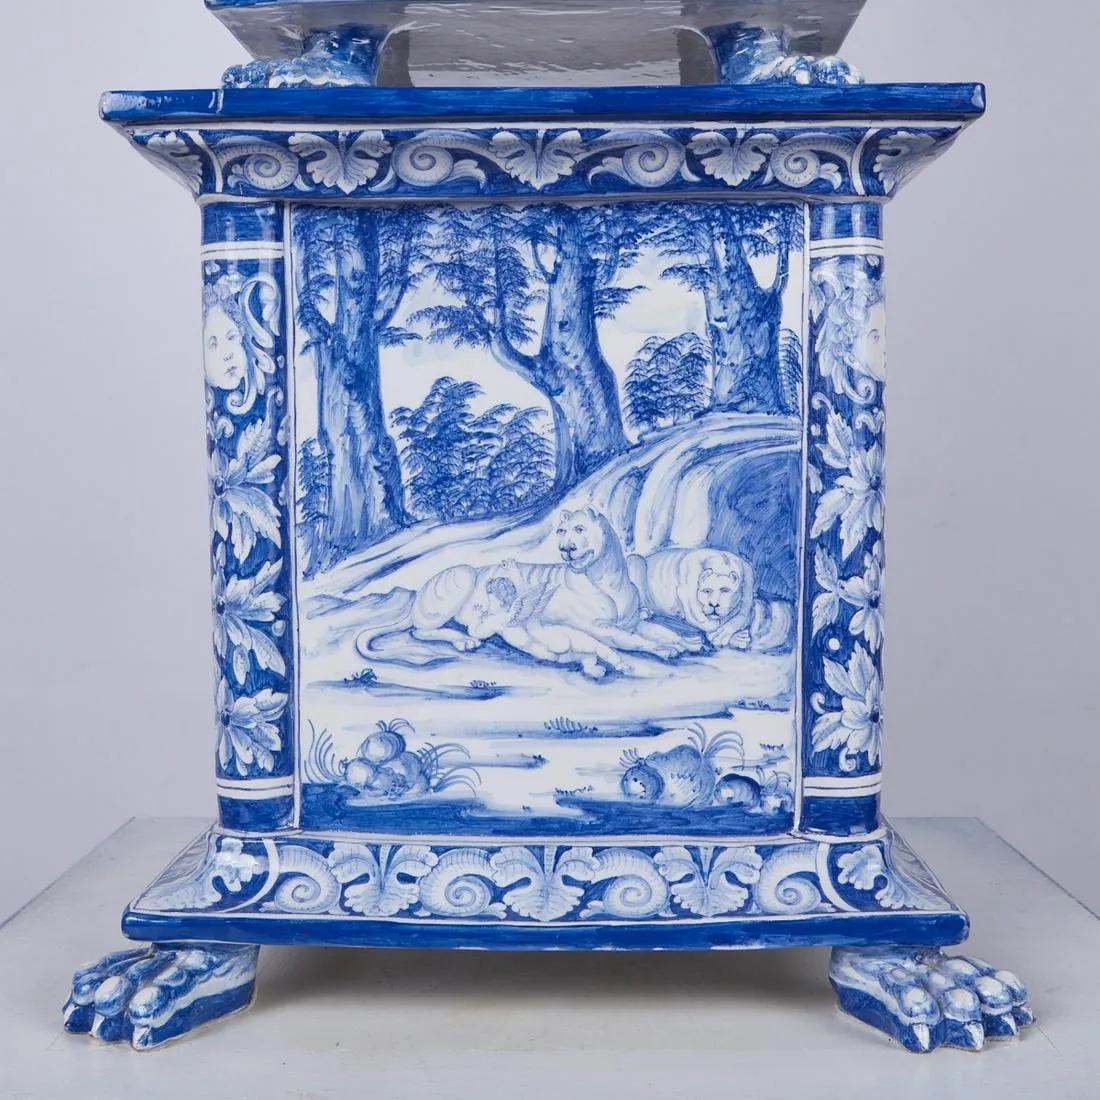 20th Century Monumental Delft Blue and White Tiered Tulipiere